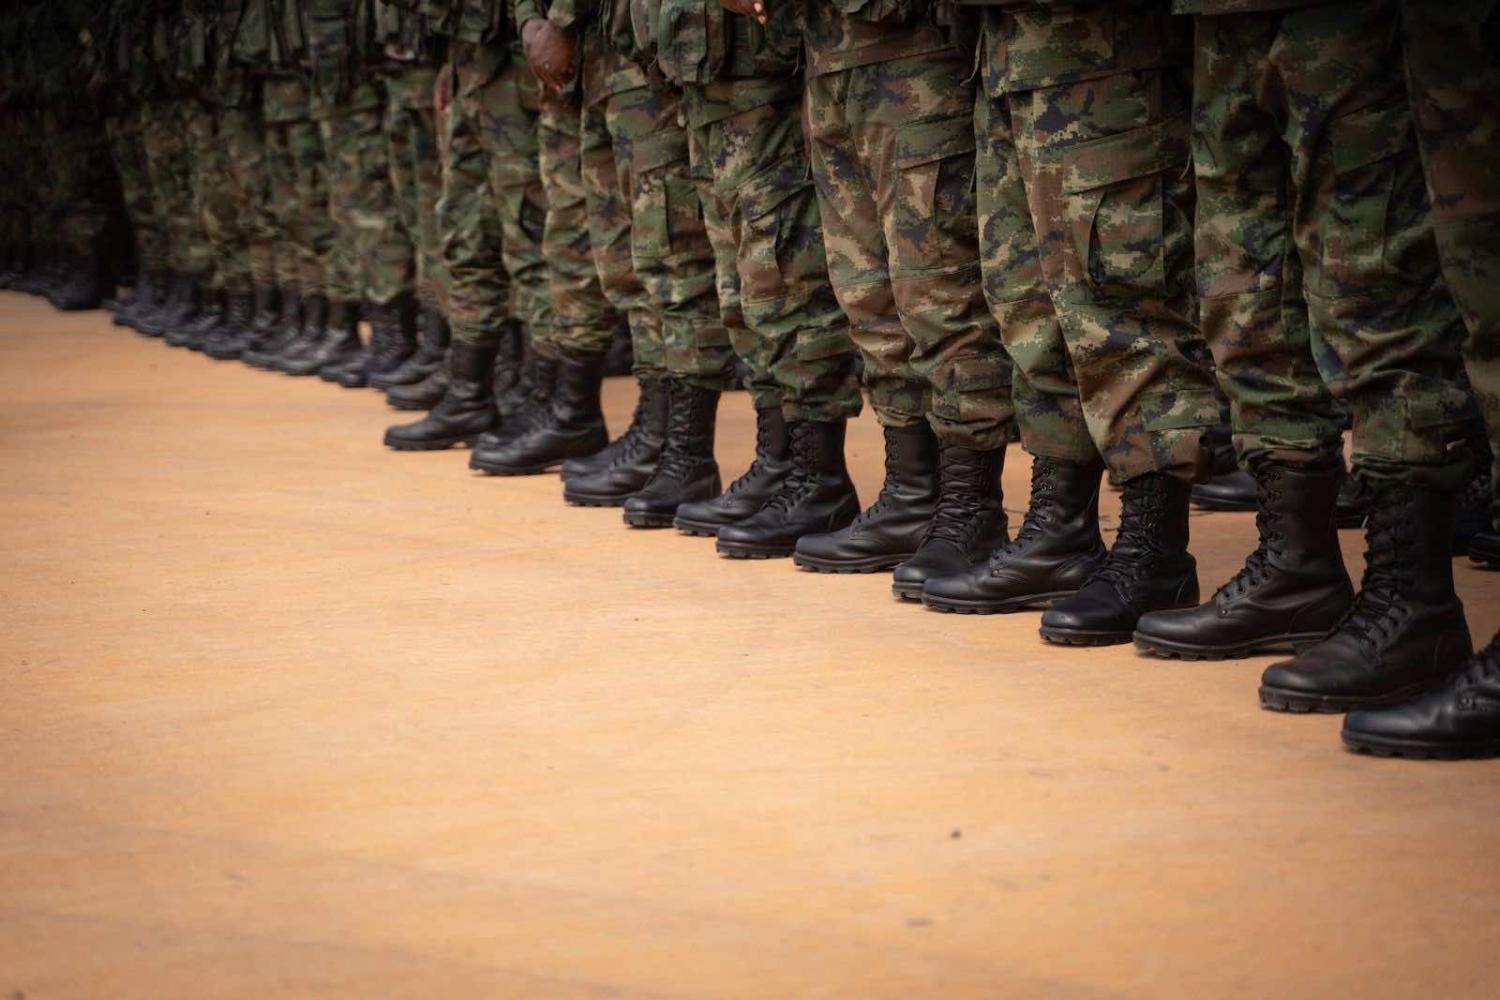 Rwandan soldiers and police prepare to deploy to Mozambique from Kigali airport on 10 July (Simon Wohlfahrt/AFP via Getty Images)